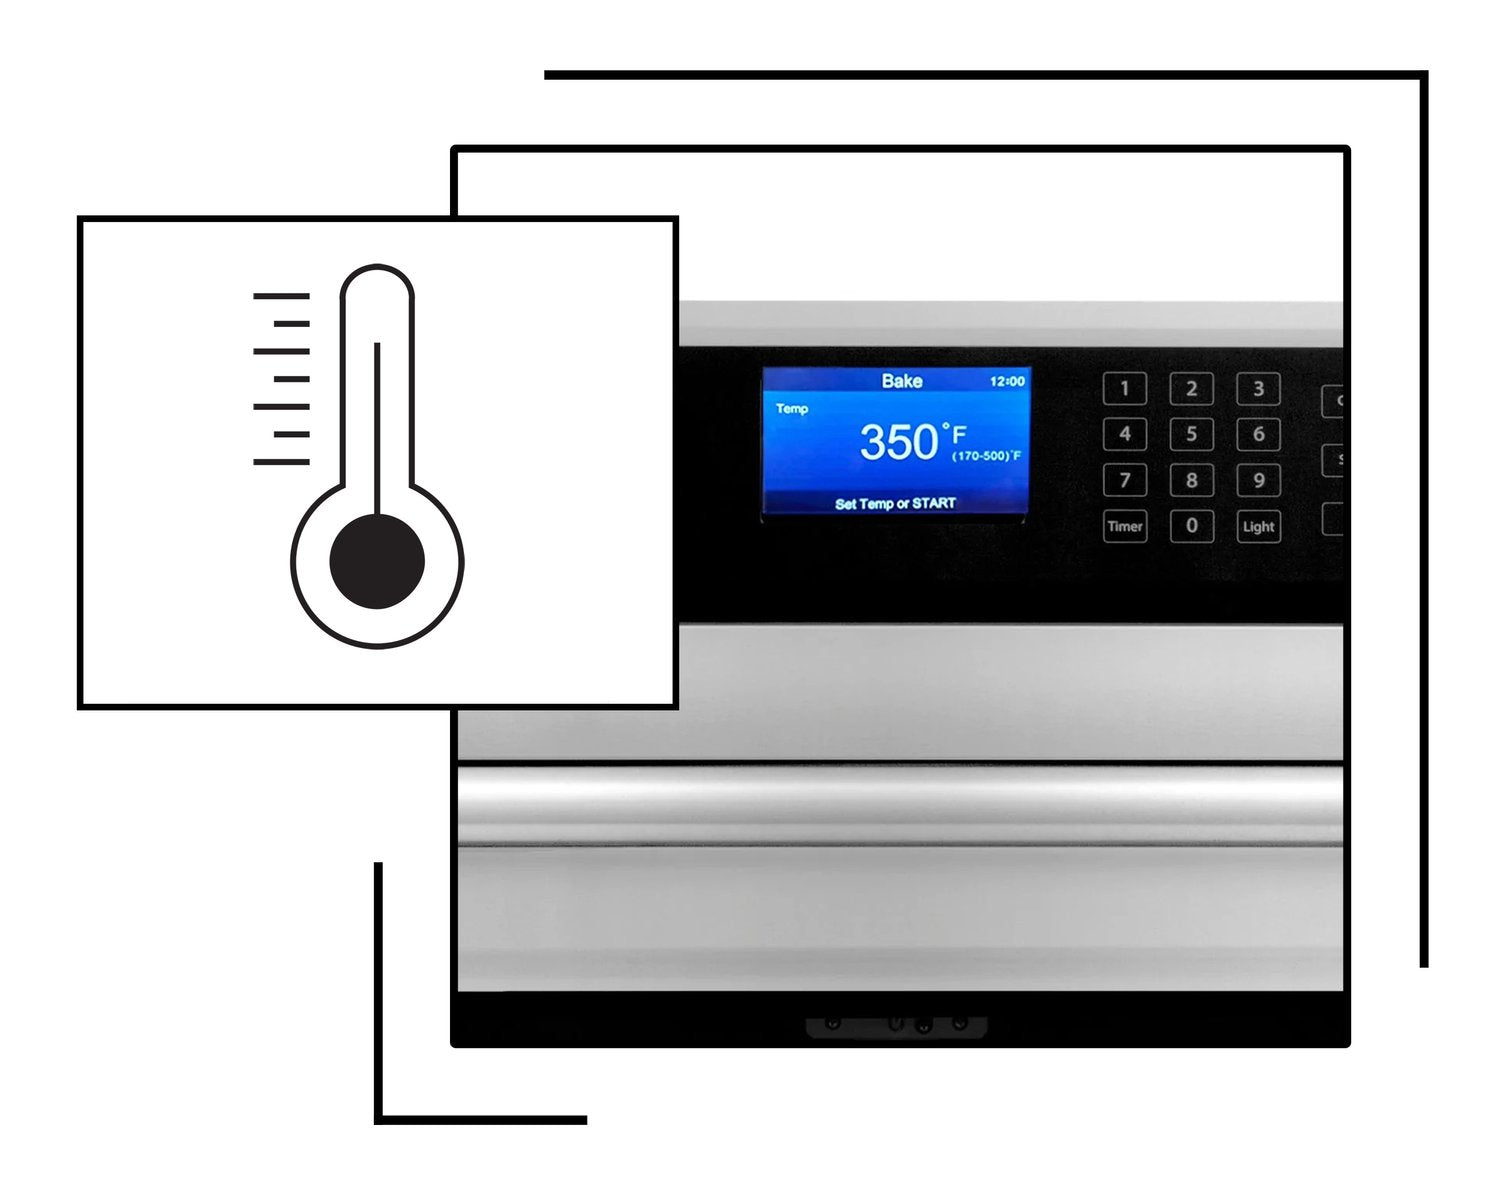 Icon and image representing wall oven with accurate and consistent temperature